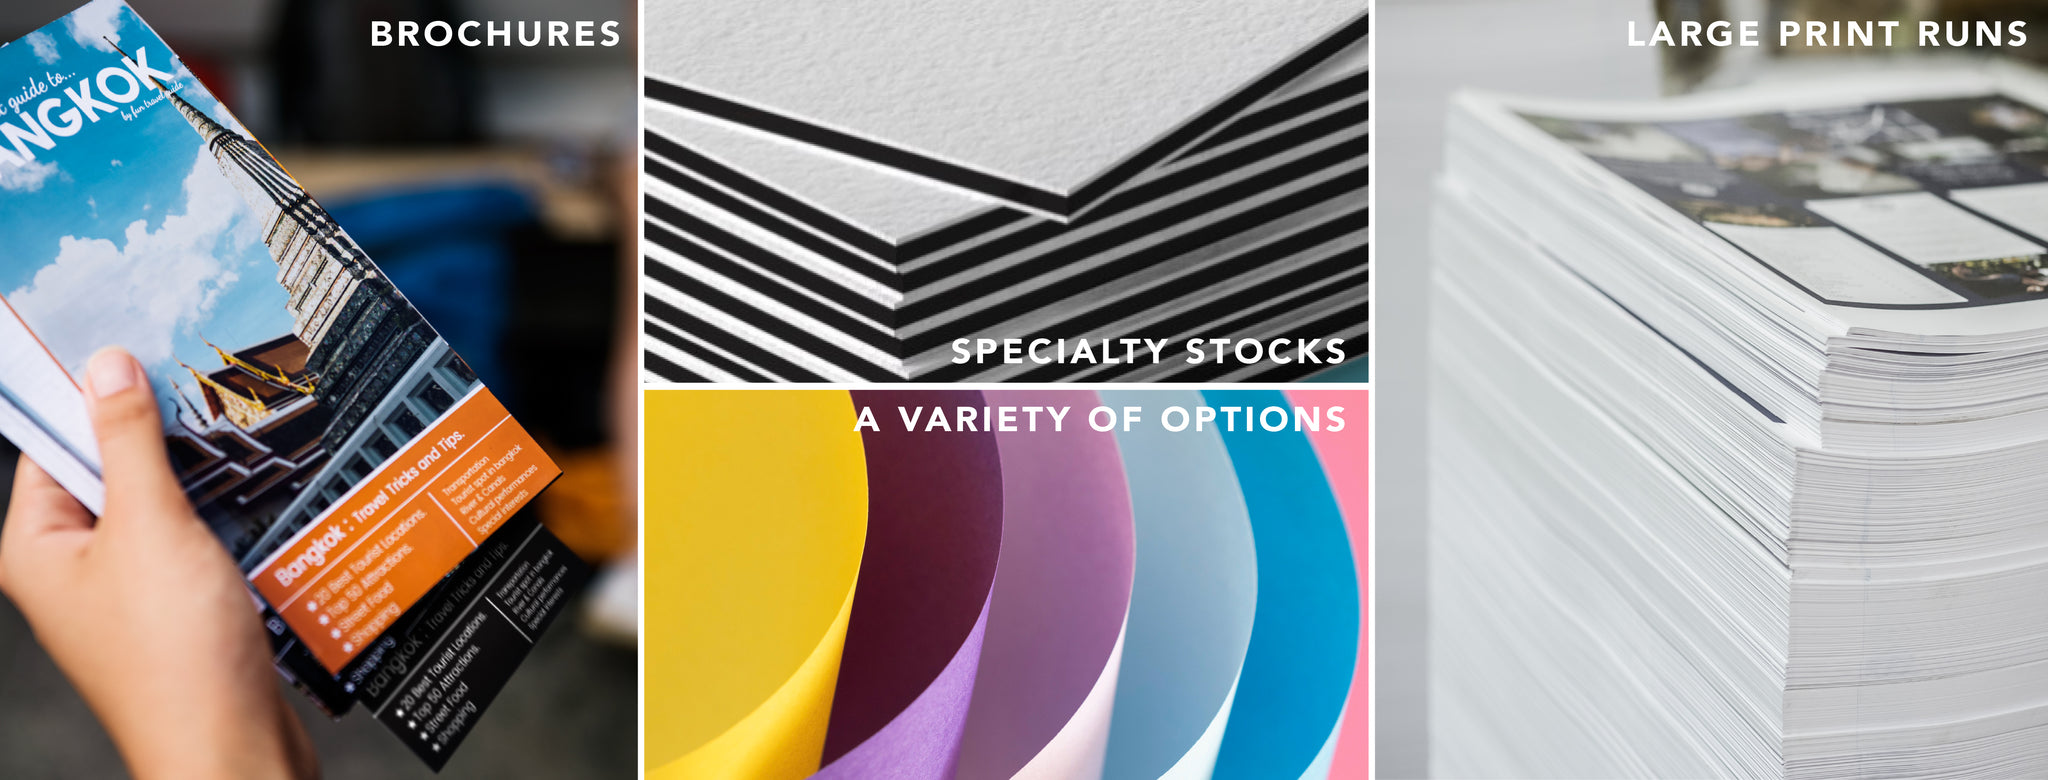 We offer a wide variety of printed products, paper stocks and printing services.